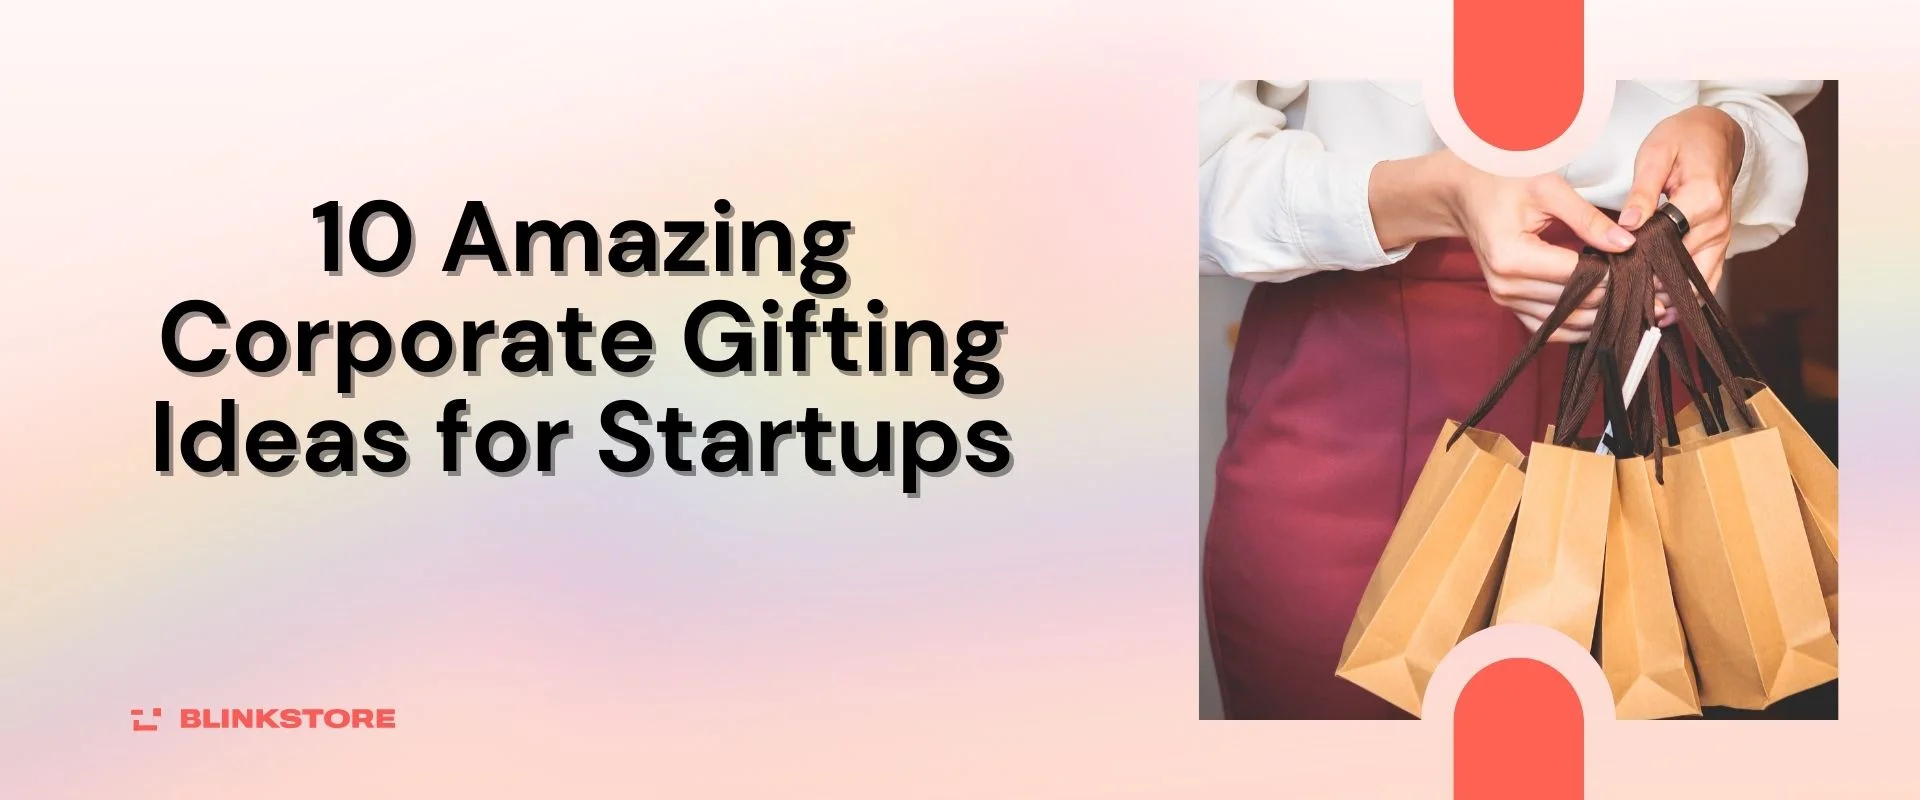 10 Amazing Corporate Gifting Ideas for Startups